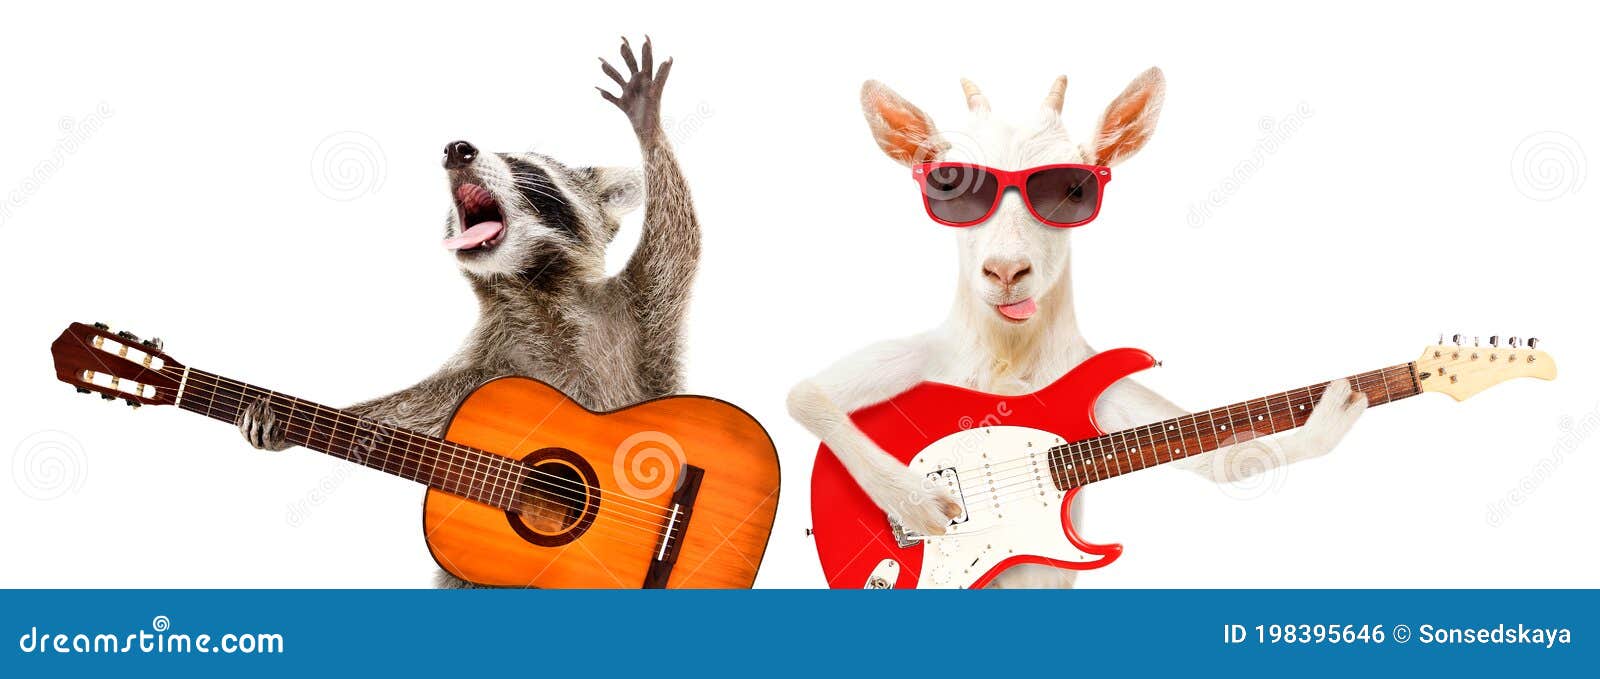 funny raccoon with acoustic guitar and goat with electric guitar